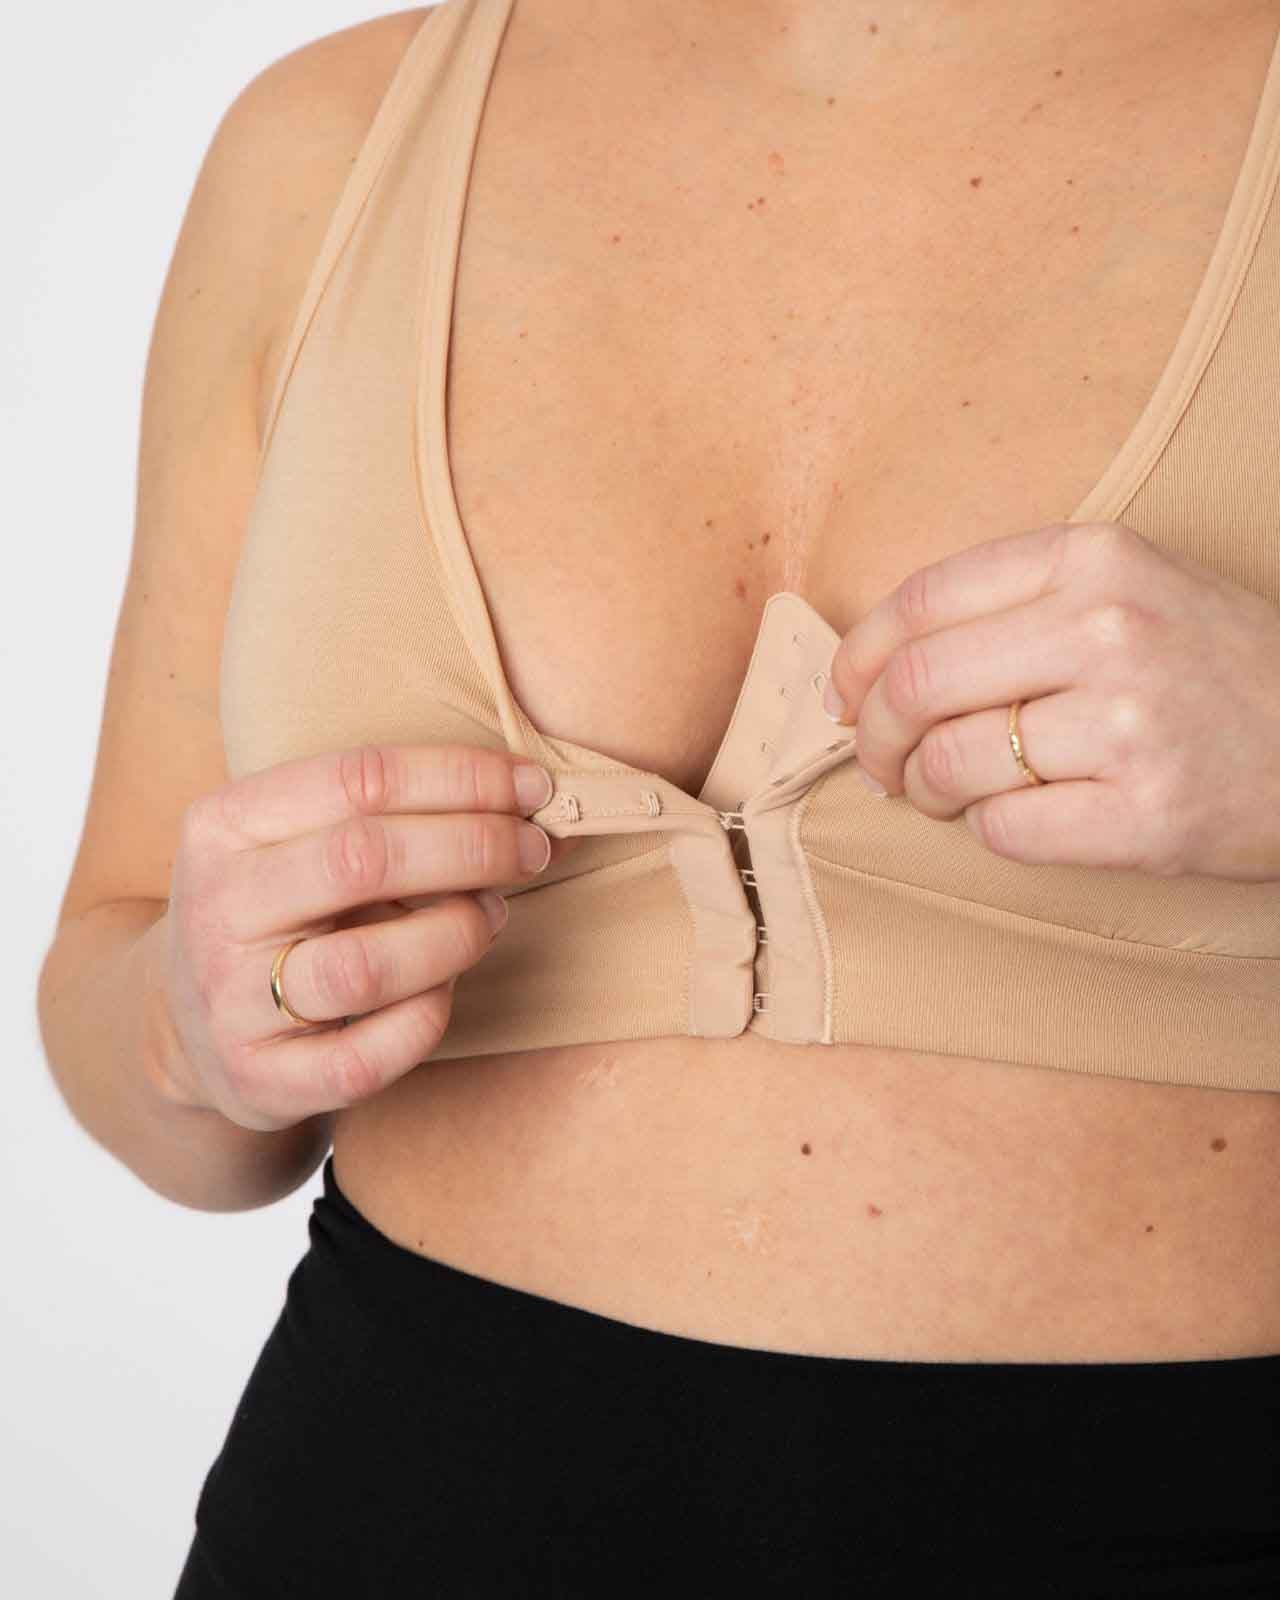 Is there any way to prevent a front closer bra from unclipping any